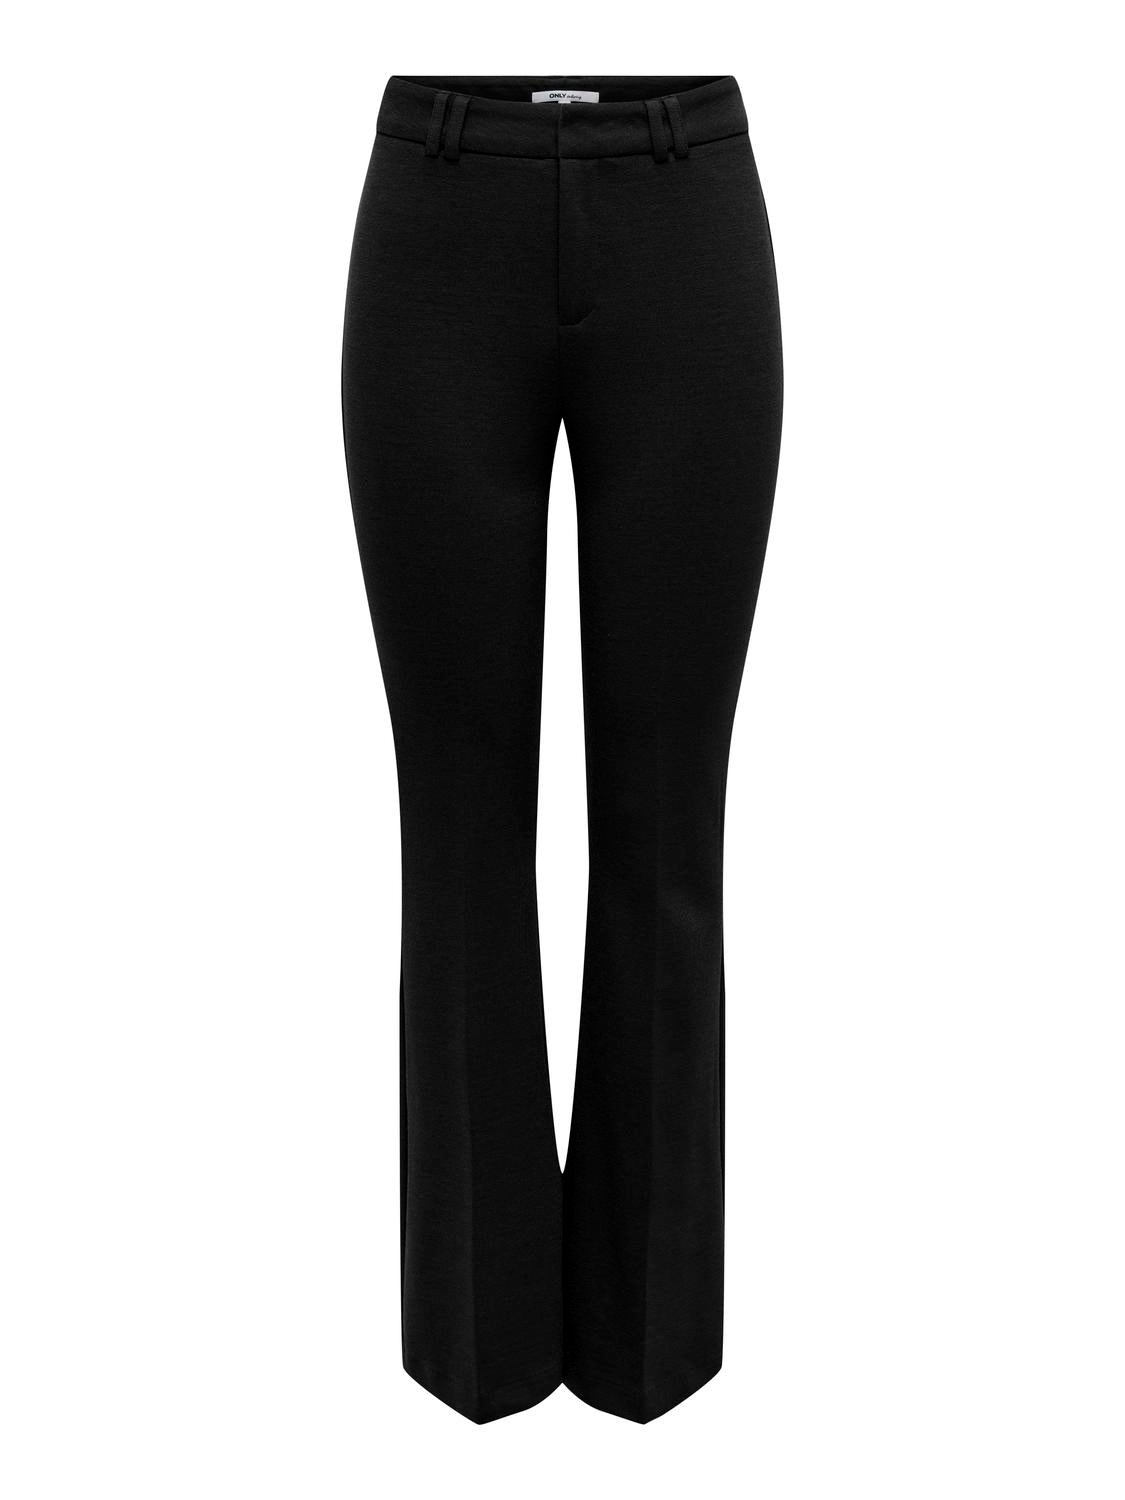 ONLY Trousers with flared fit -Black - 15298660